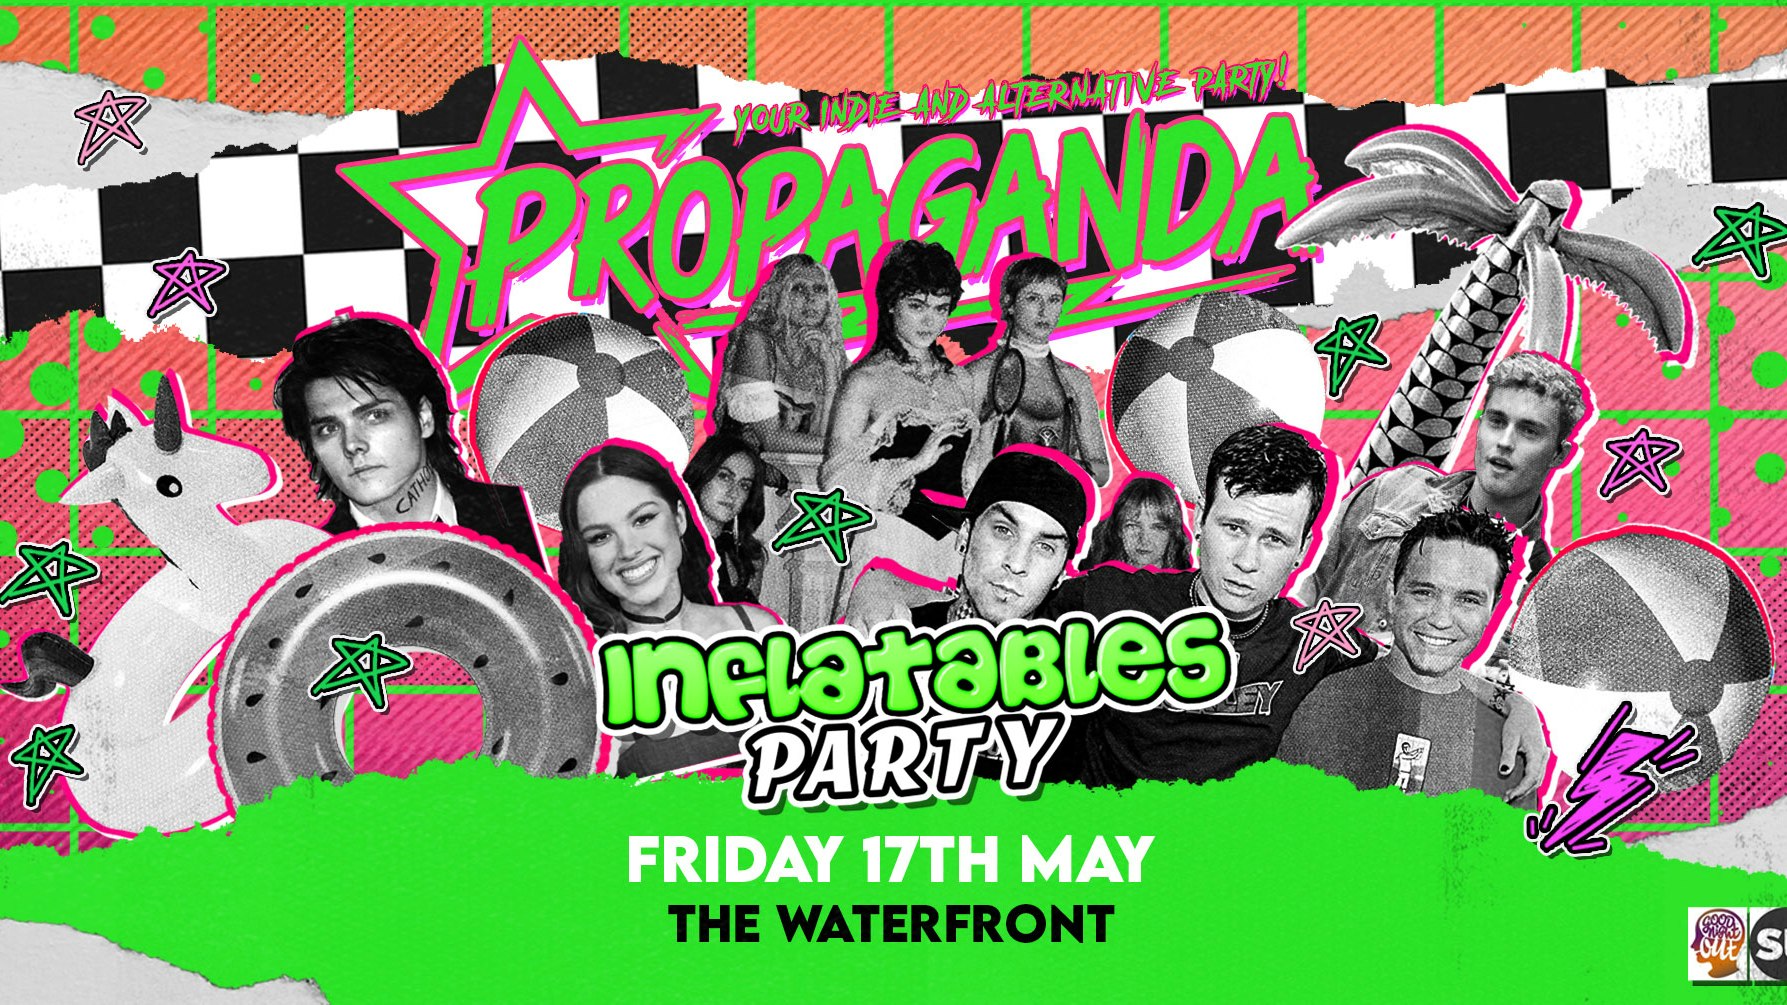 Inflatables Party! Propaganda Norwich Your Indie + Alt Party- The Waterfront